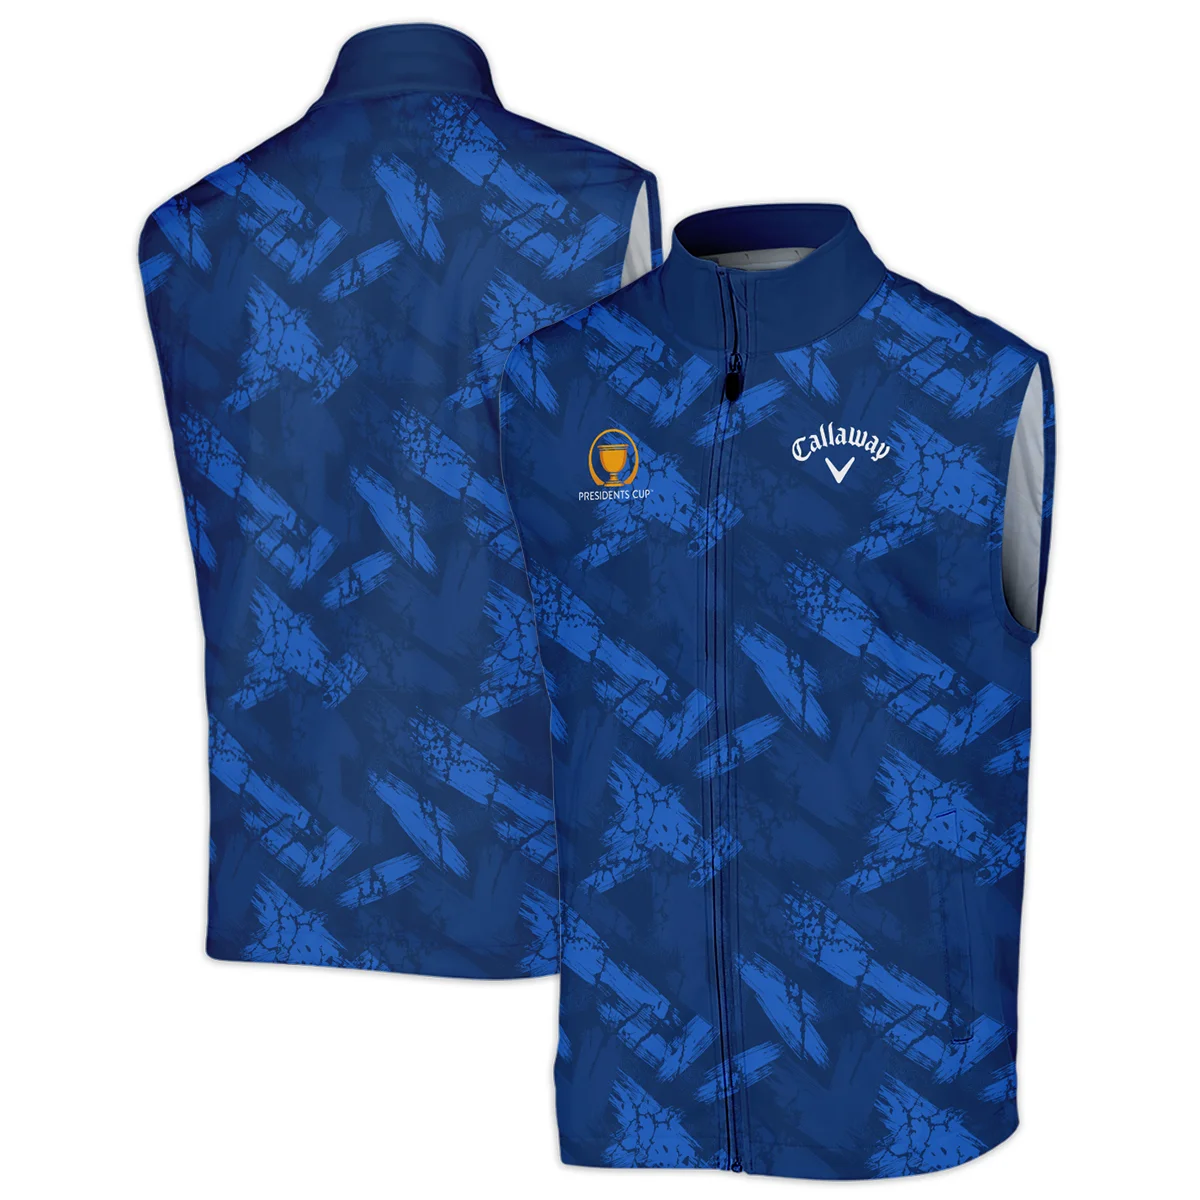 Golf Dark Blue With Grunge Pattern Presidents Cup Callaway Sleeveless Jacket All Over Prints HOPDC210624A01CLWSJK